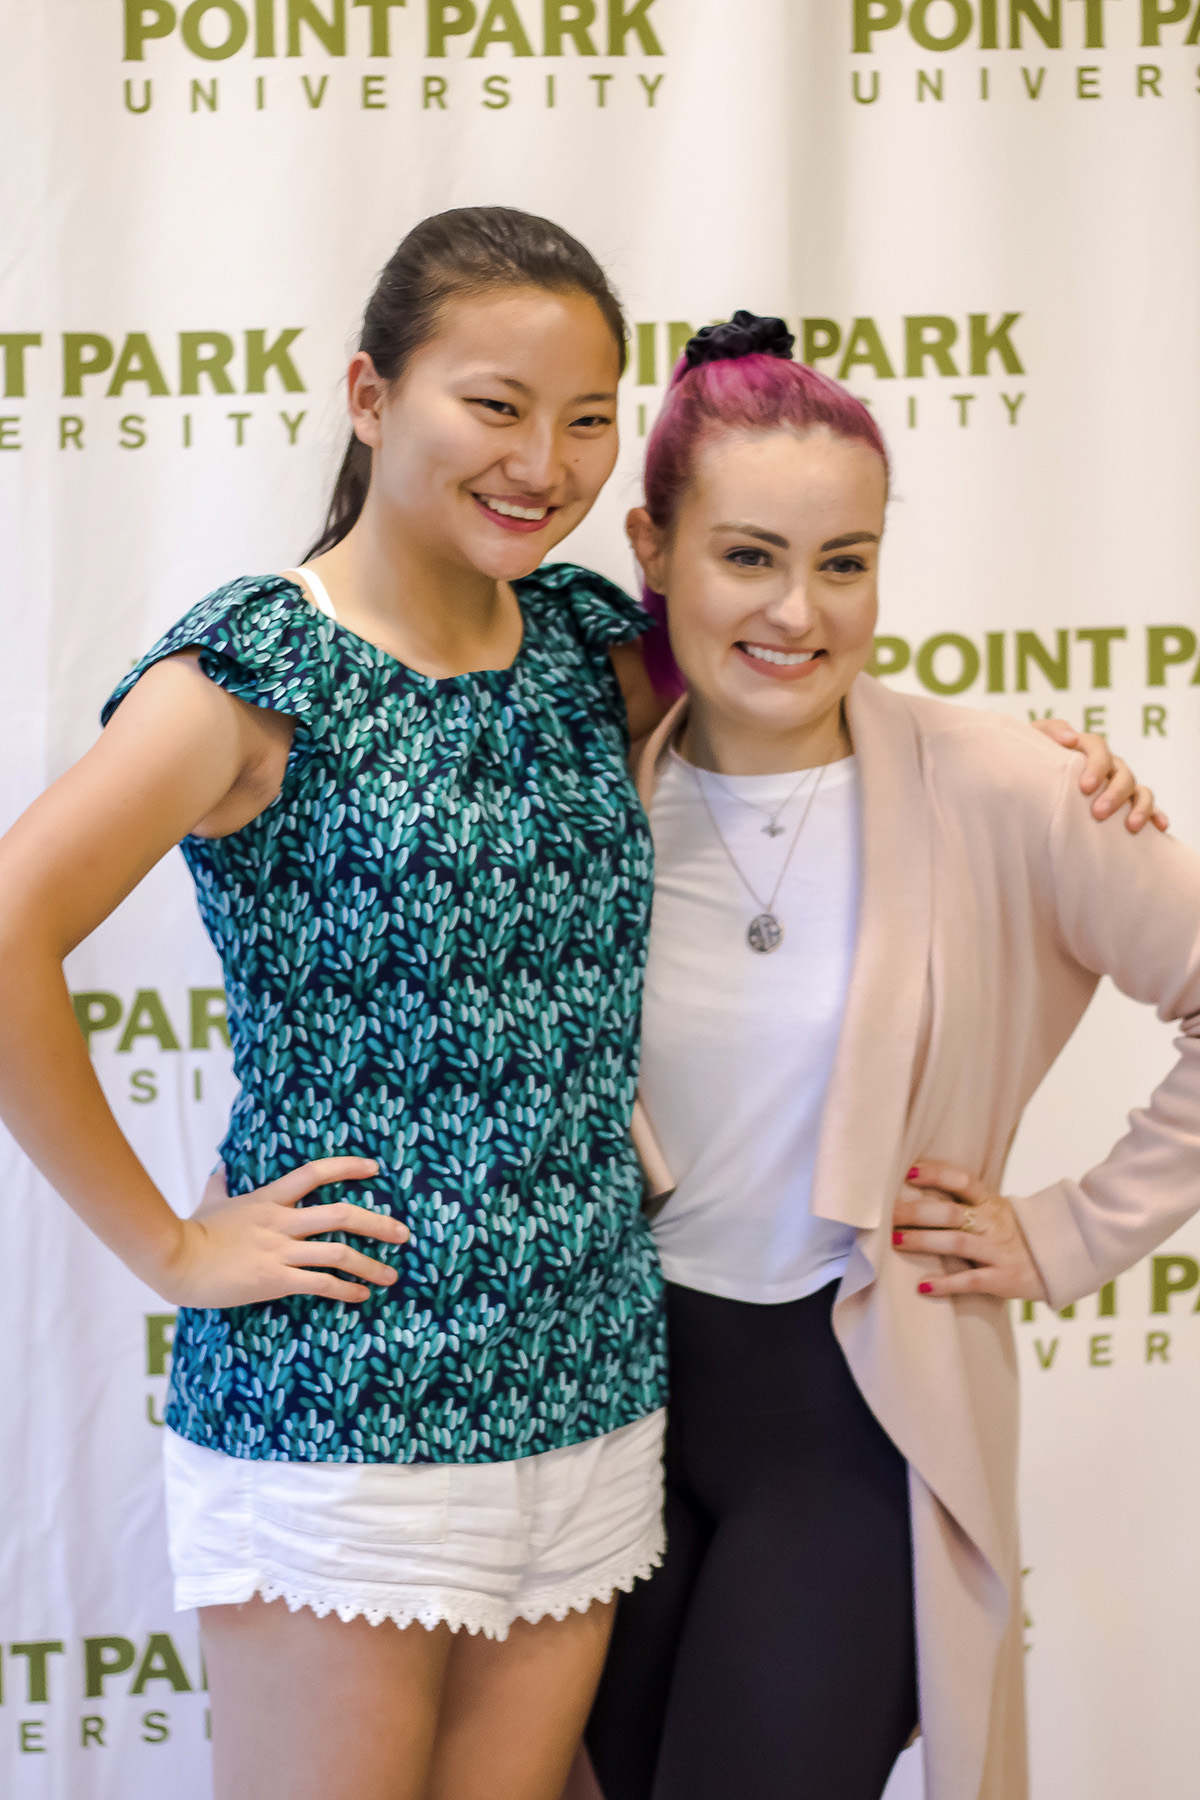 Pictured is YouTube sensation Molly Burke at Point Park University. Photo by Anna Wolf